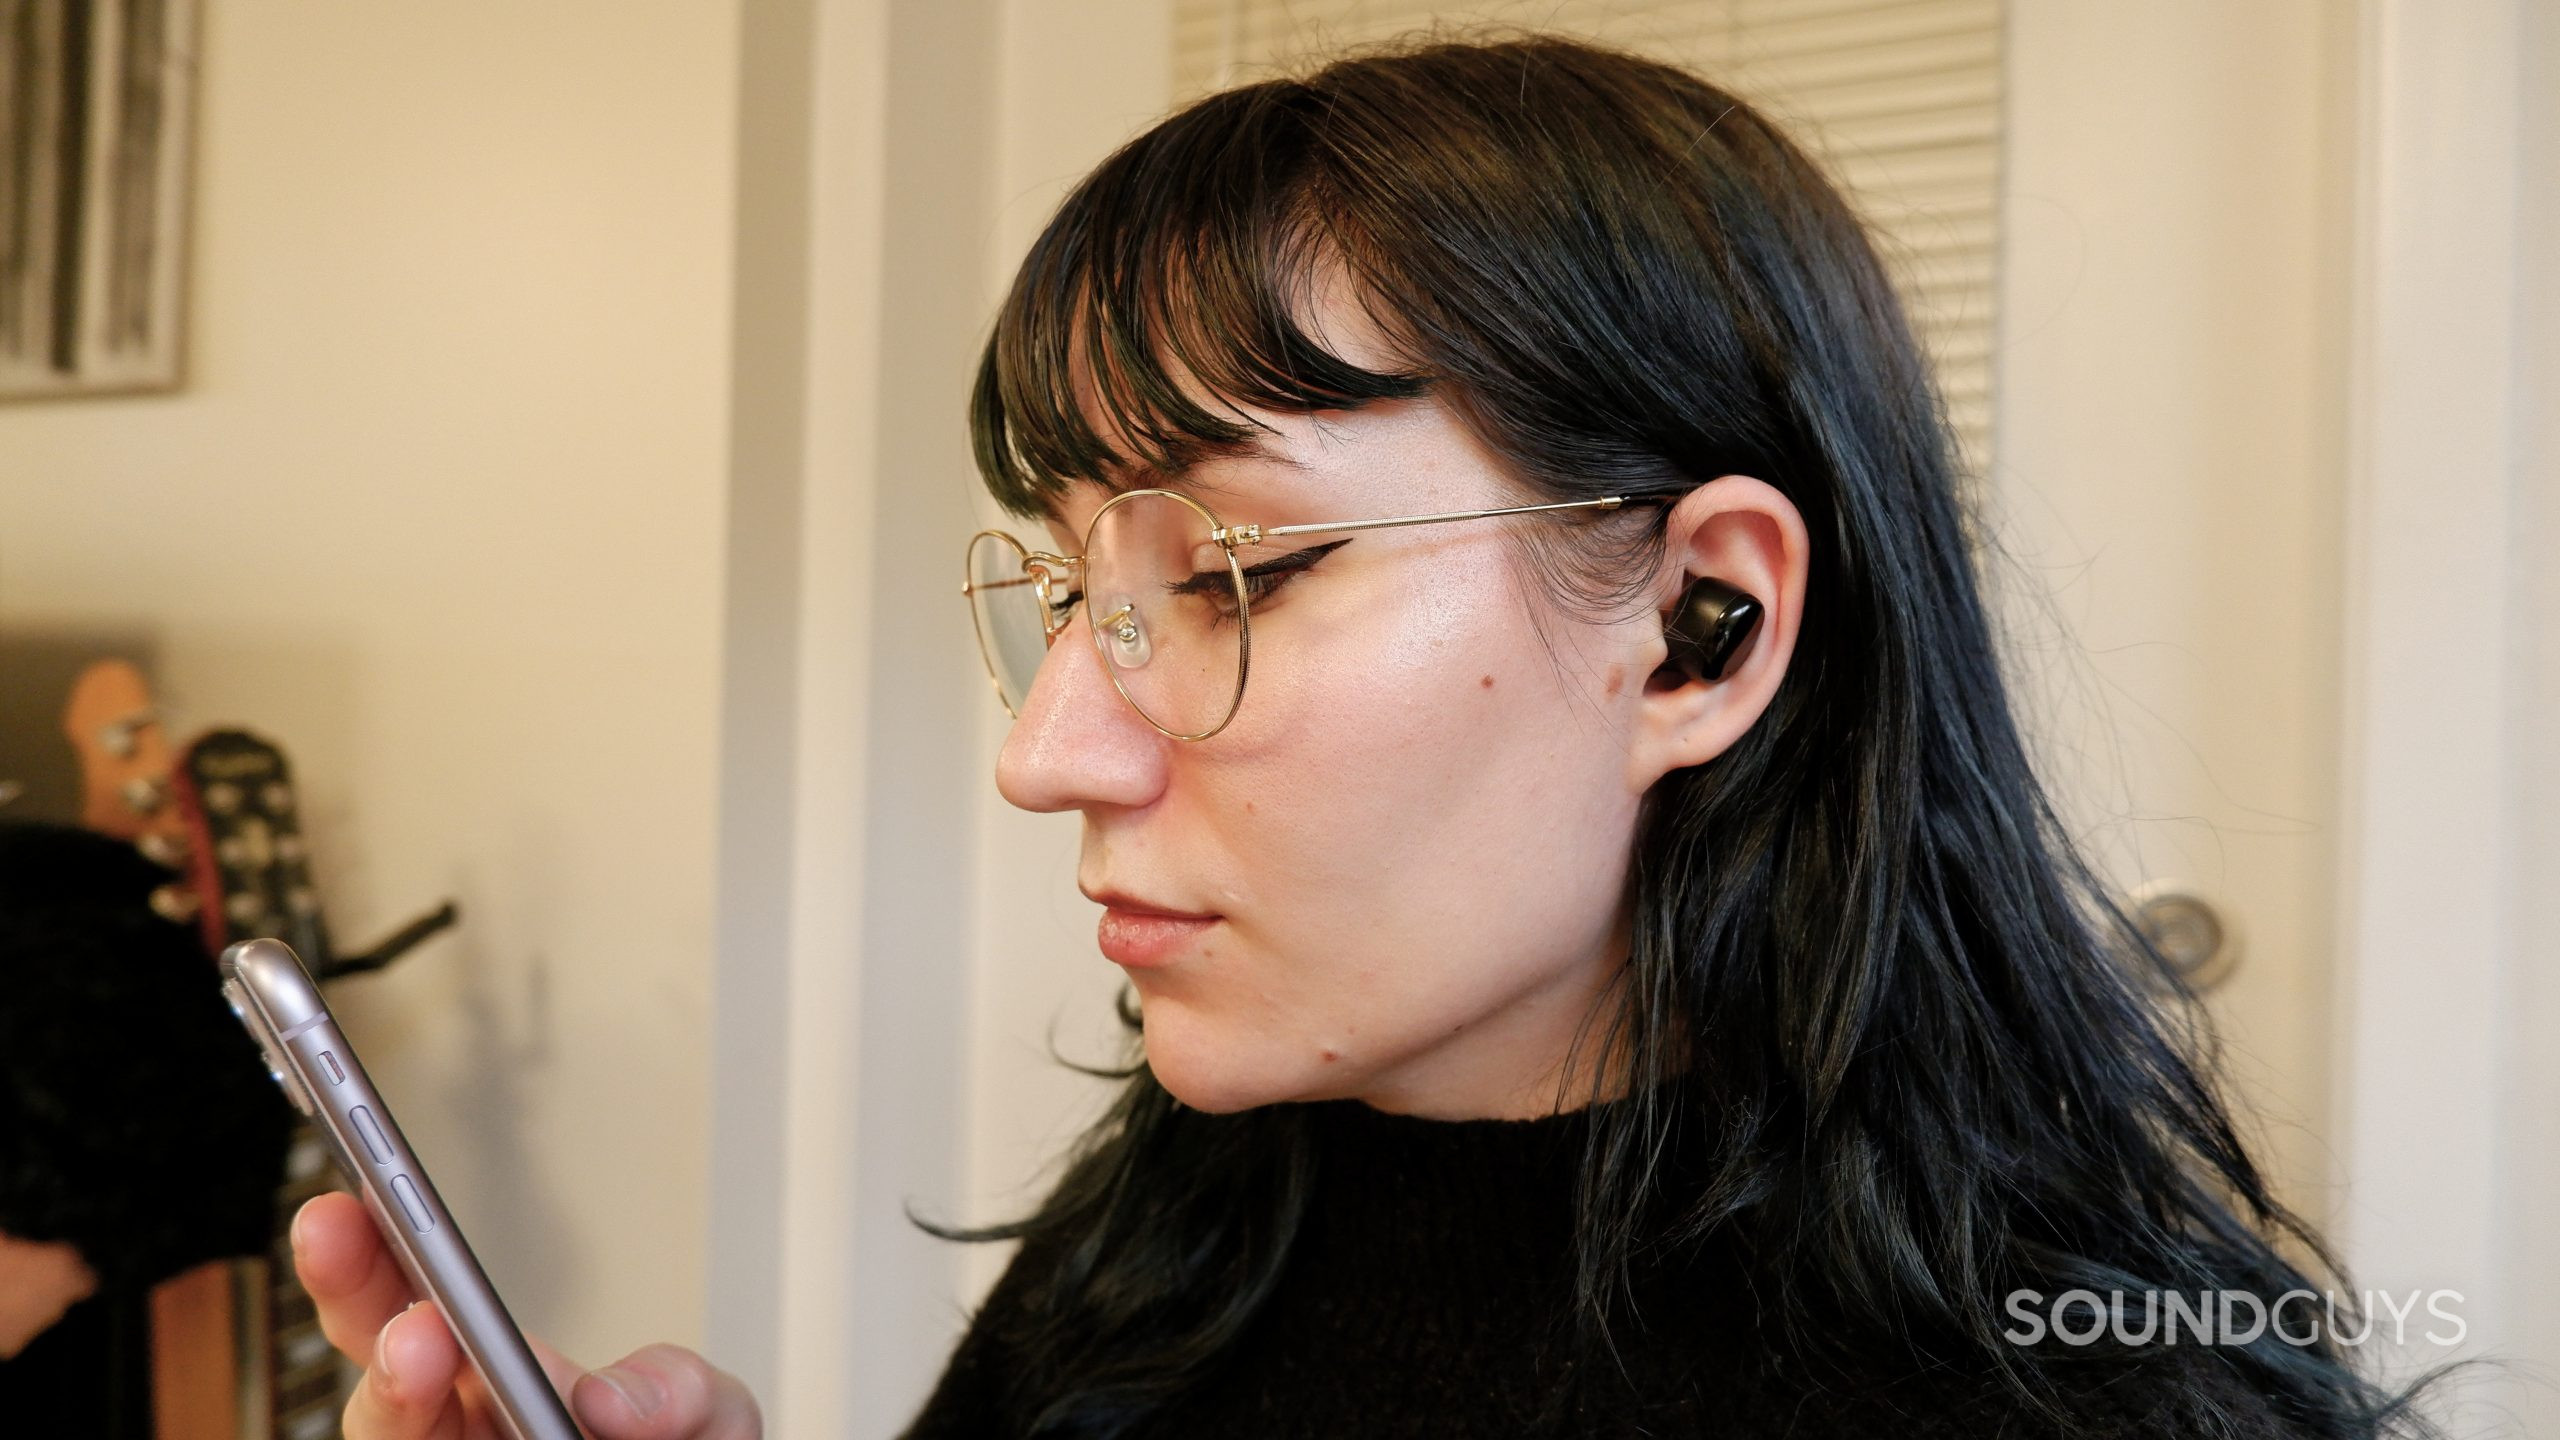 The TOZO T6 earbuds in a person's ears looking at a phone.